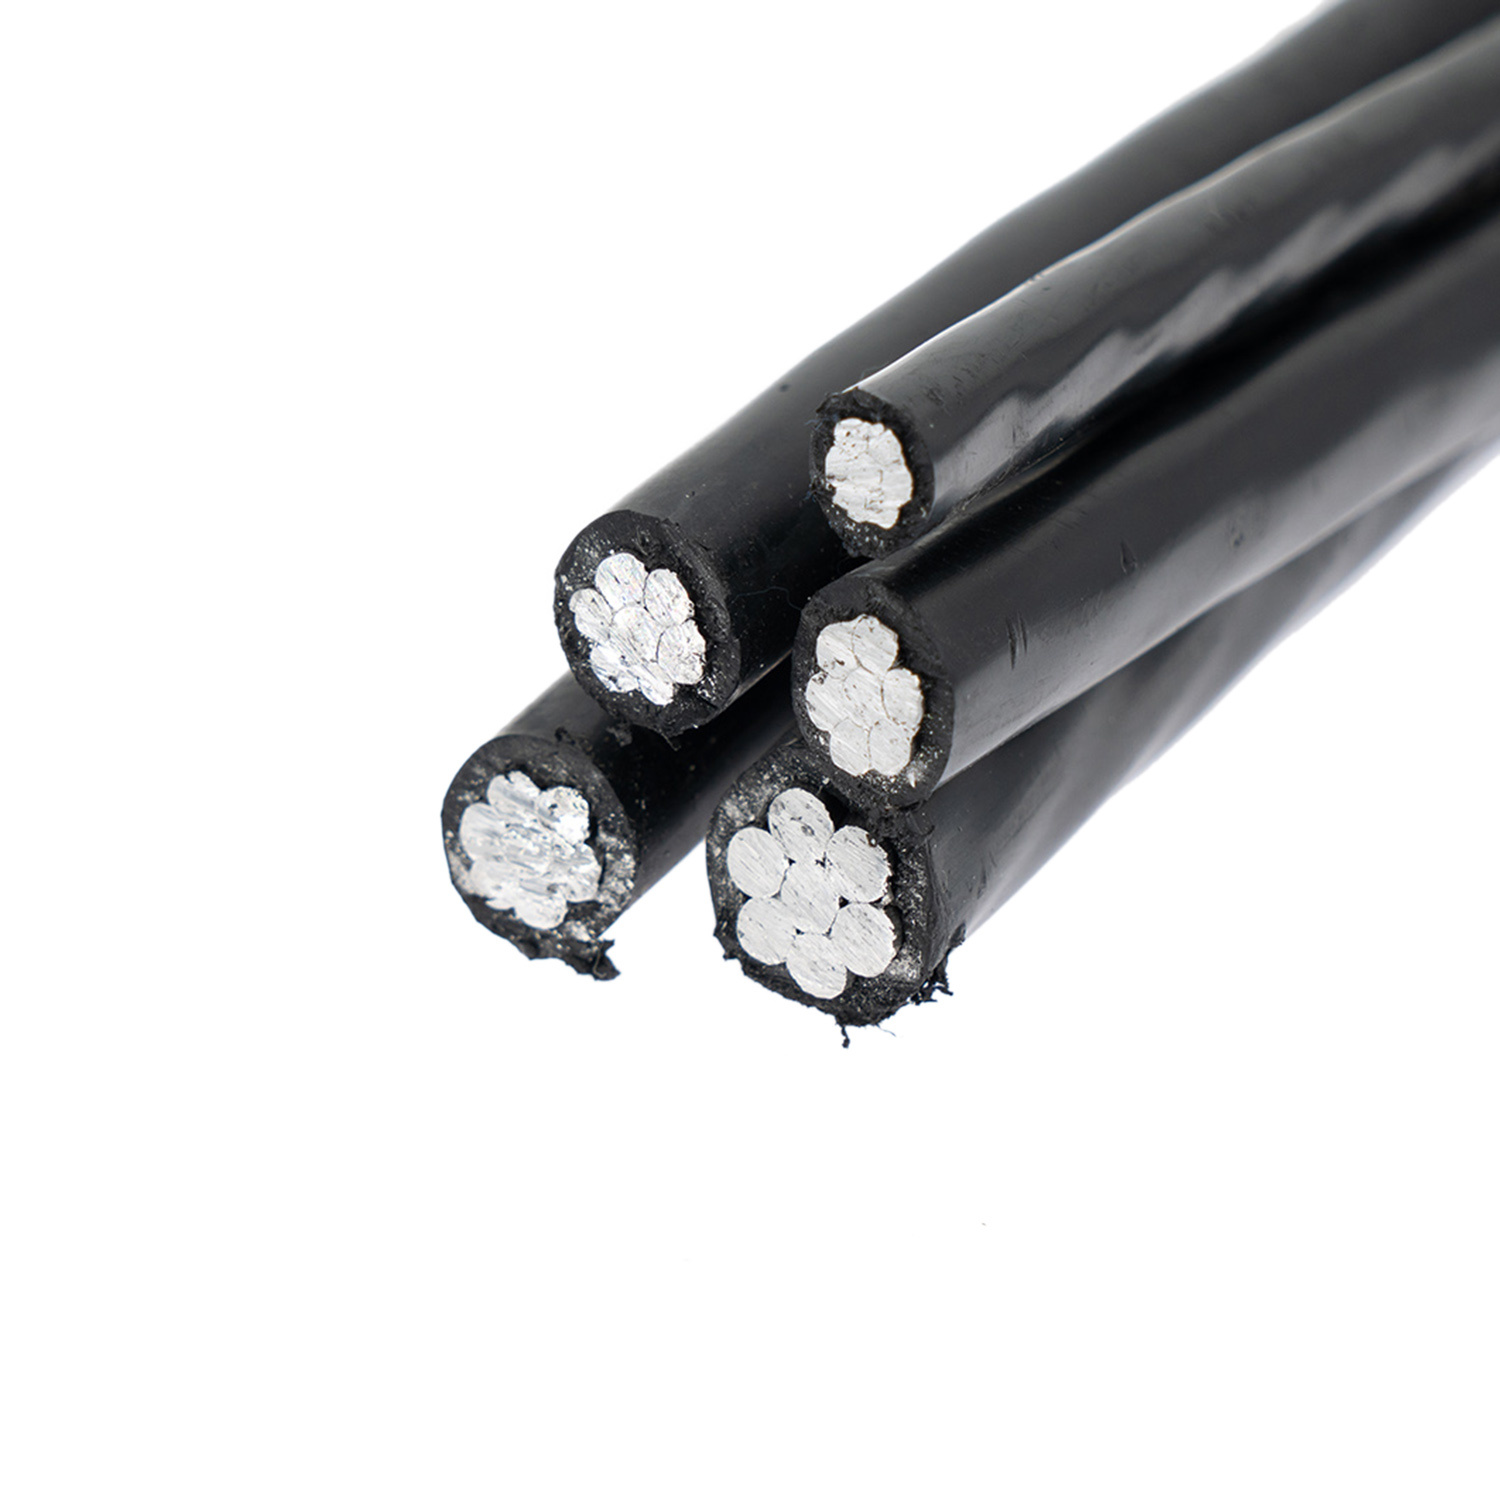 
                Aerial Bundle Cable (ABC Cable) Aerial Insulated Cable Aluminum Cable Service Drop Wire Price Per Meter
            